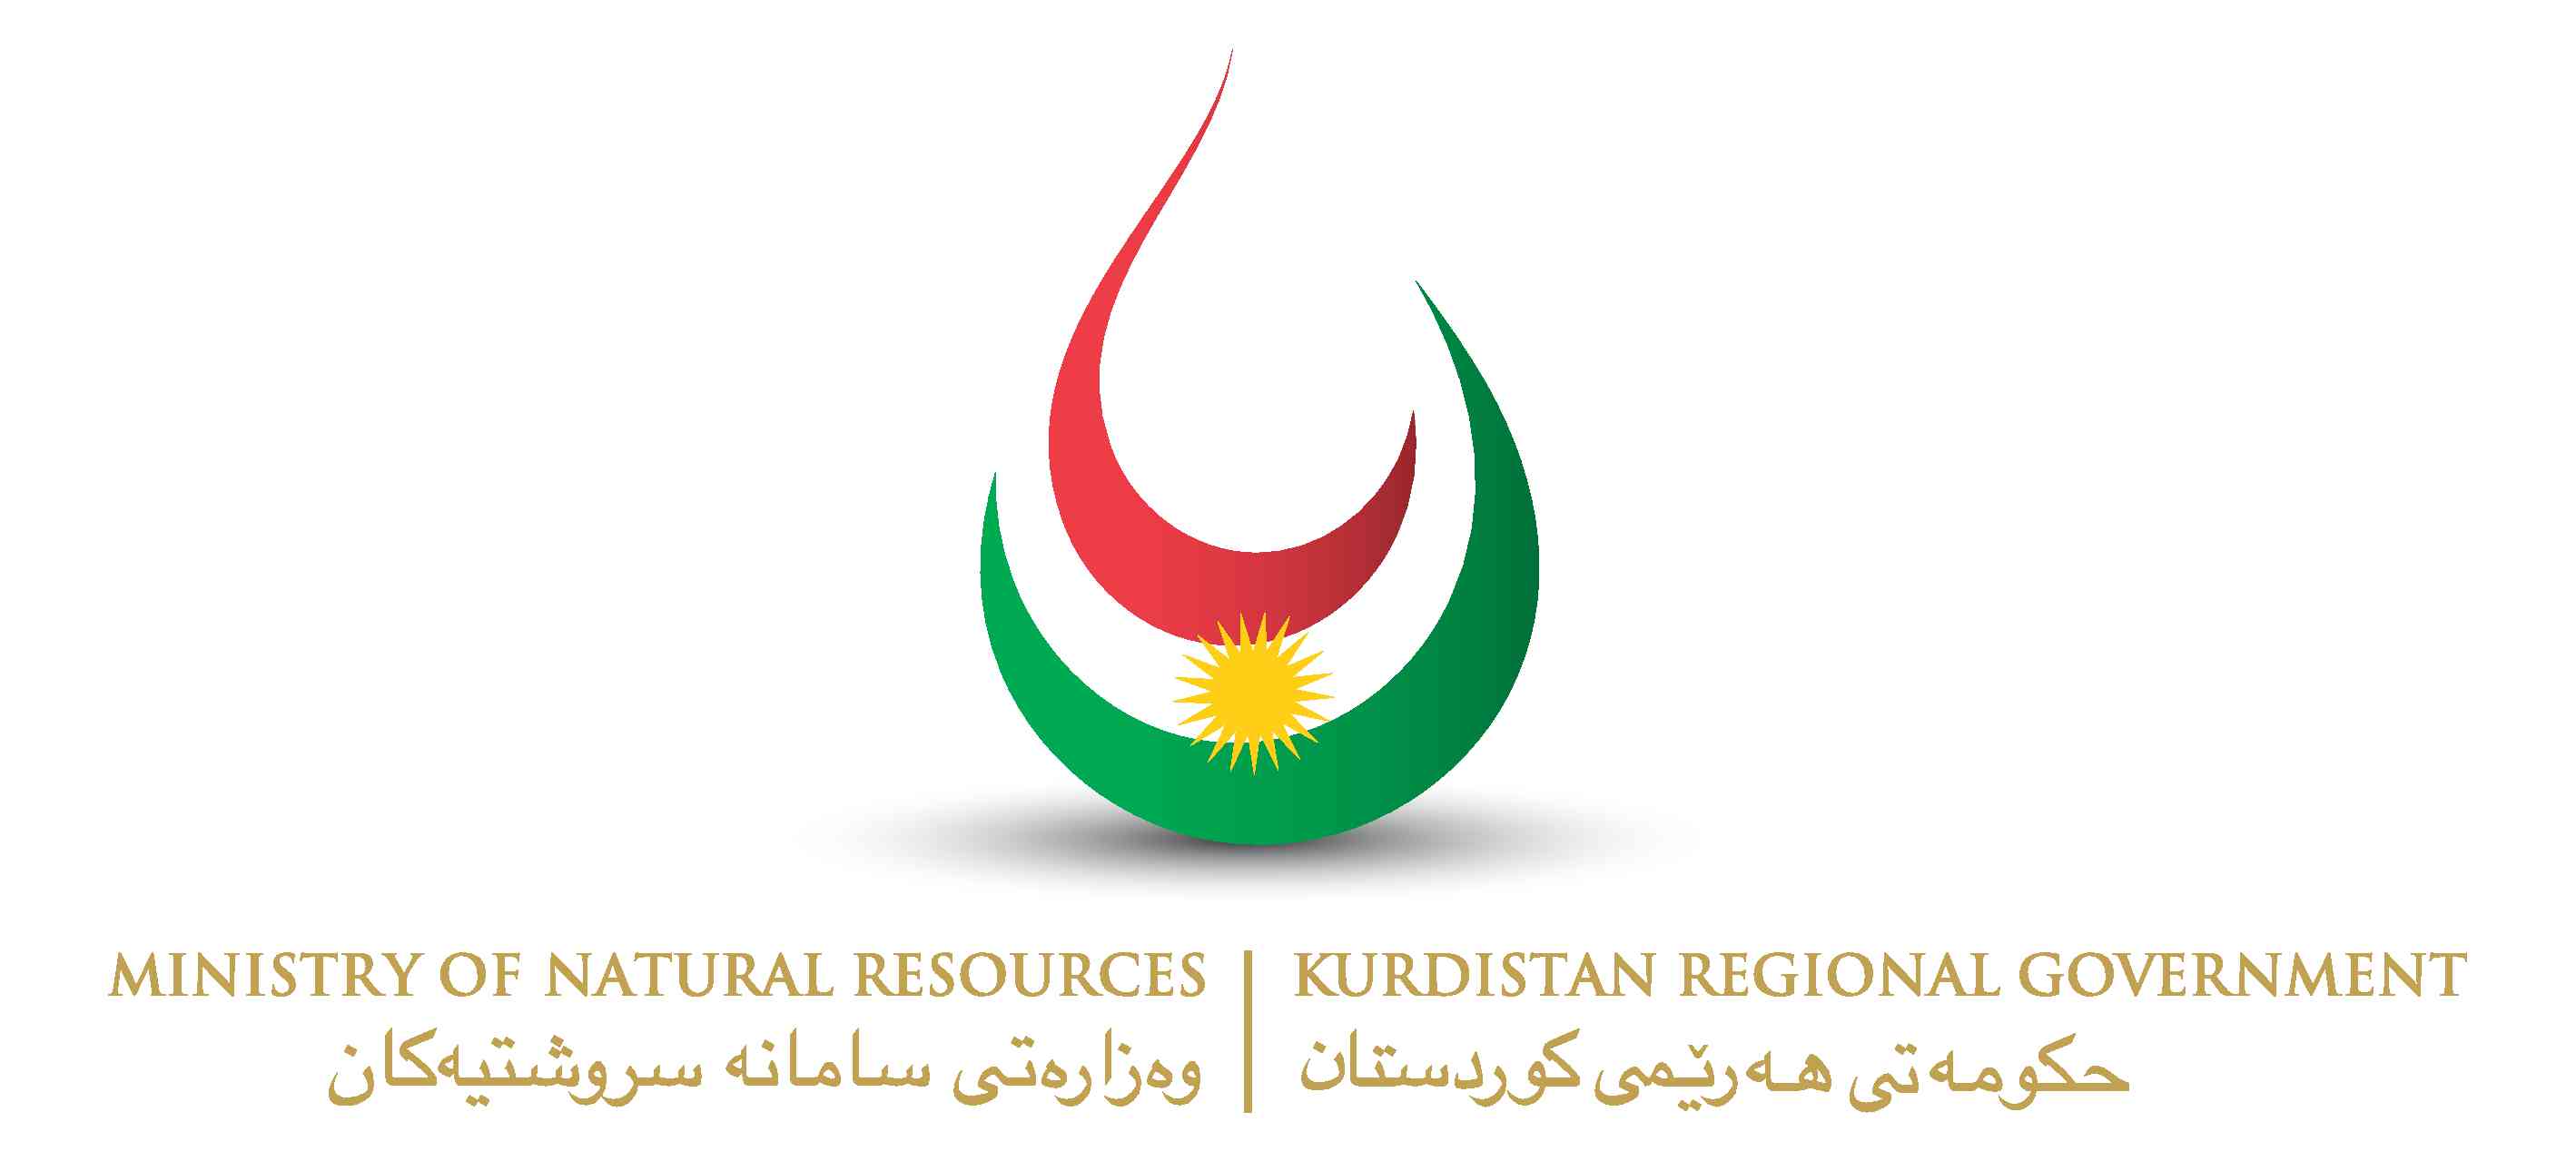 DrawMedia.net / Statement by the ministry of natural resources of KRG